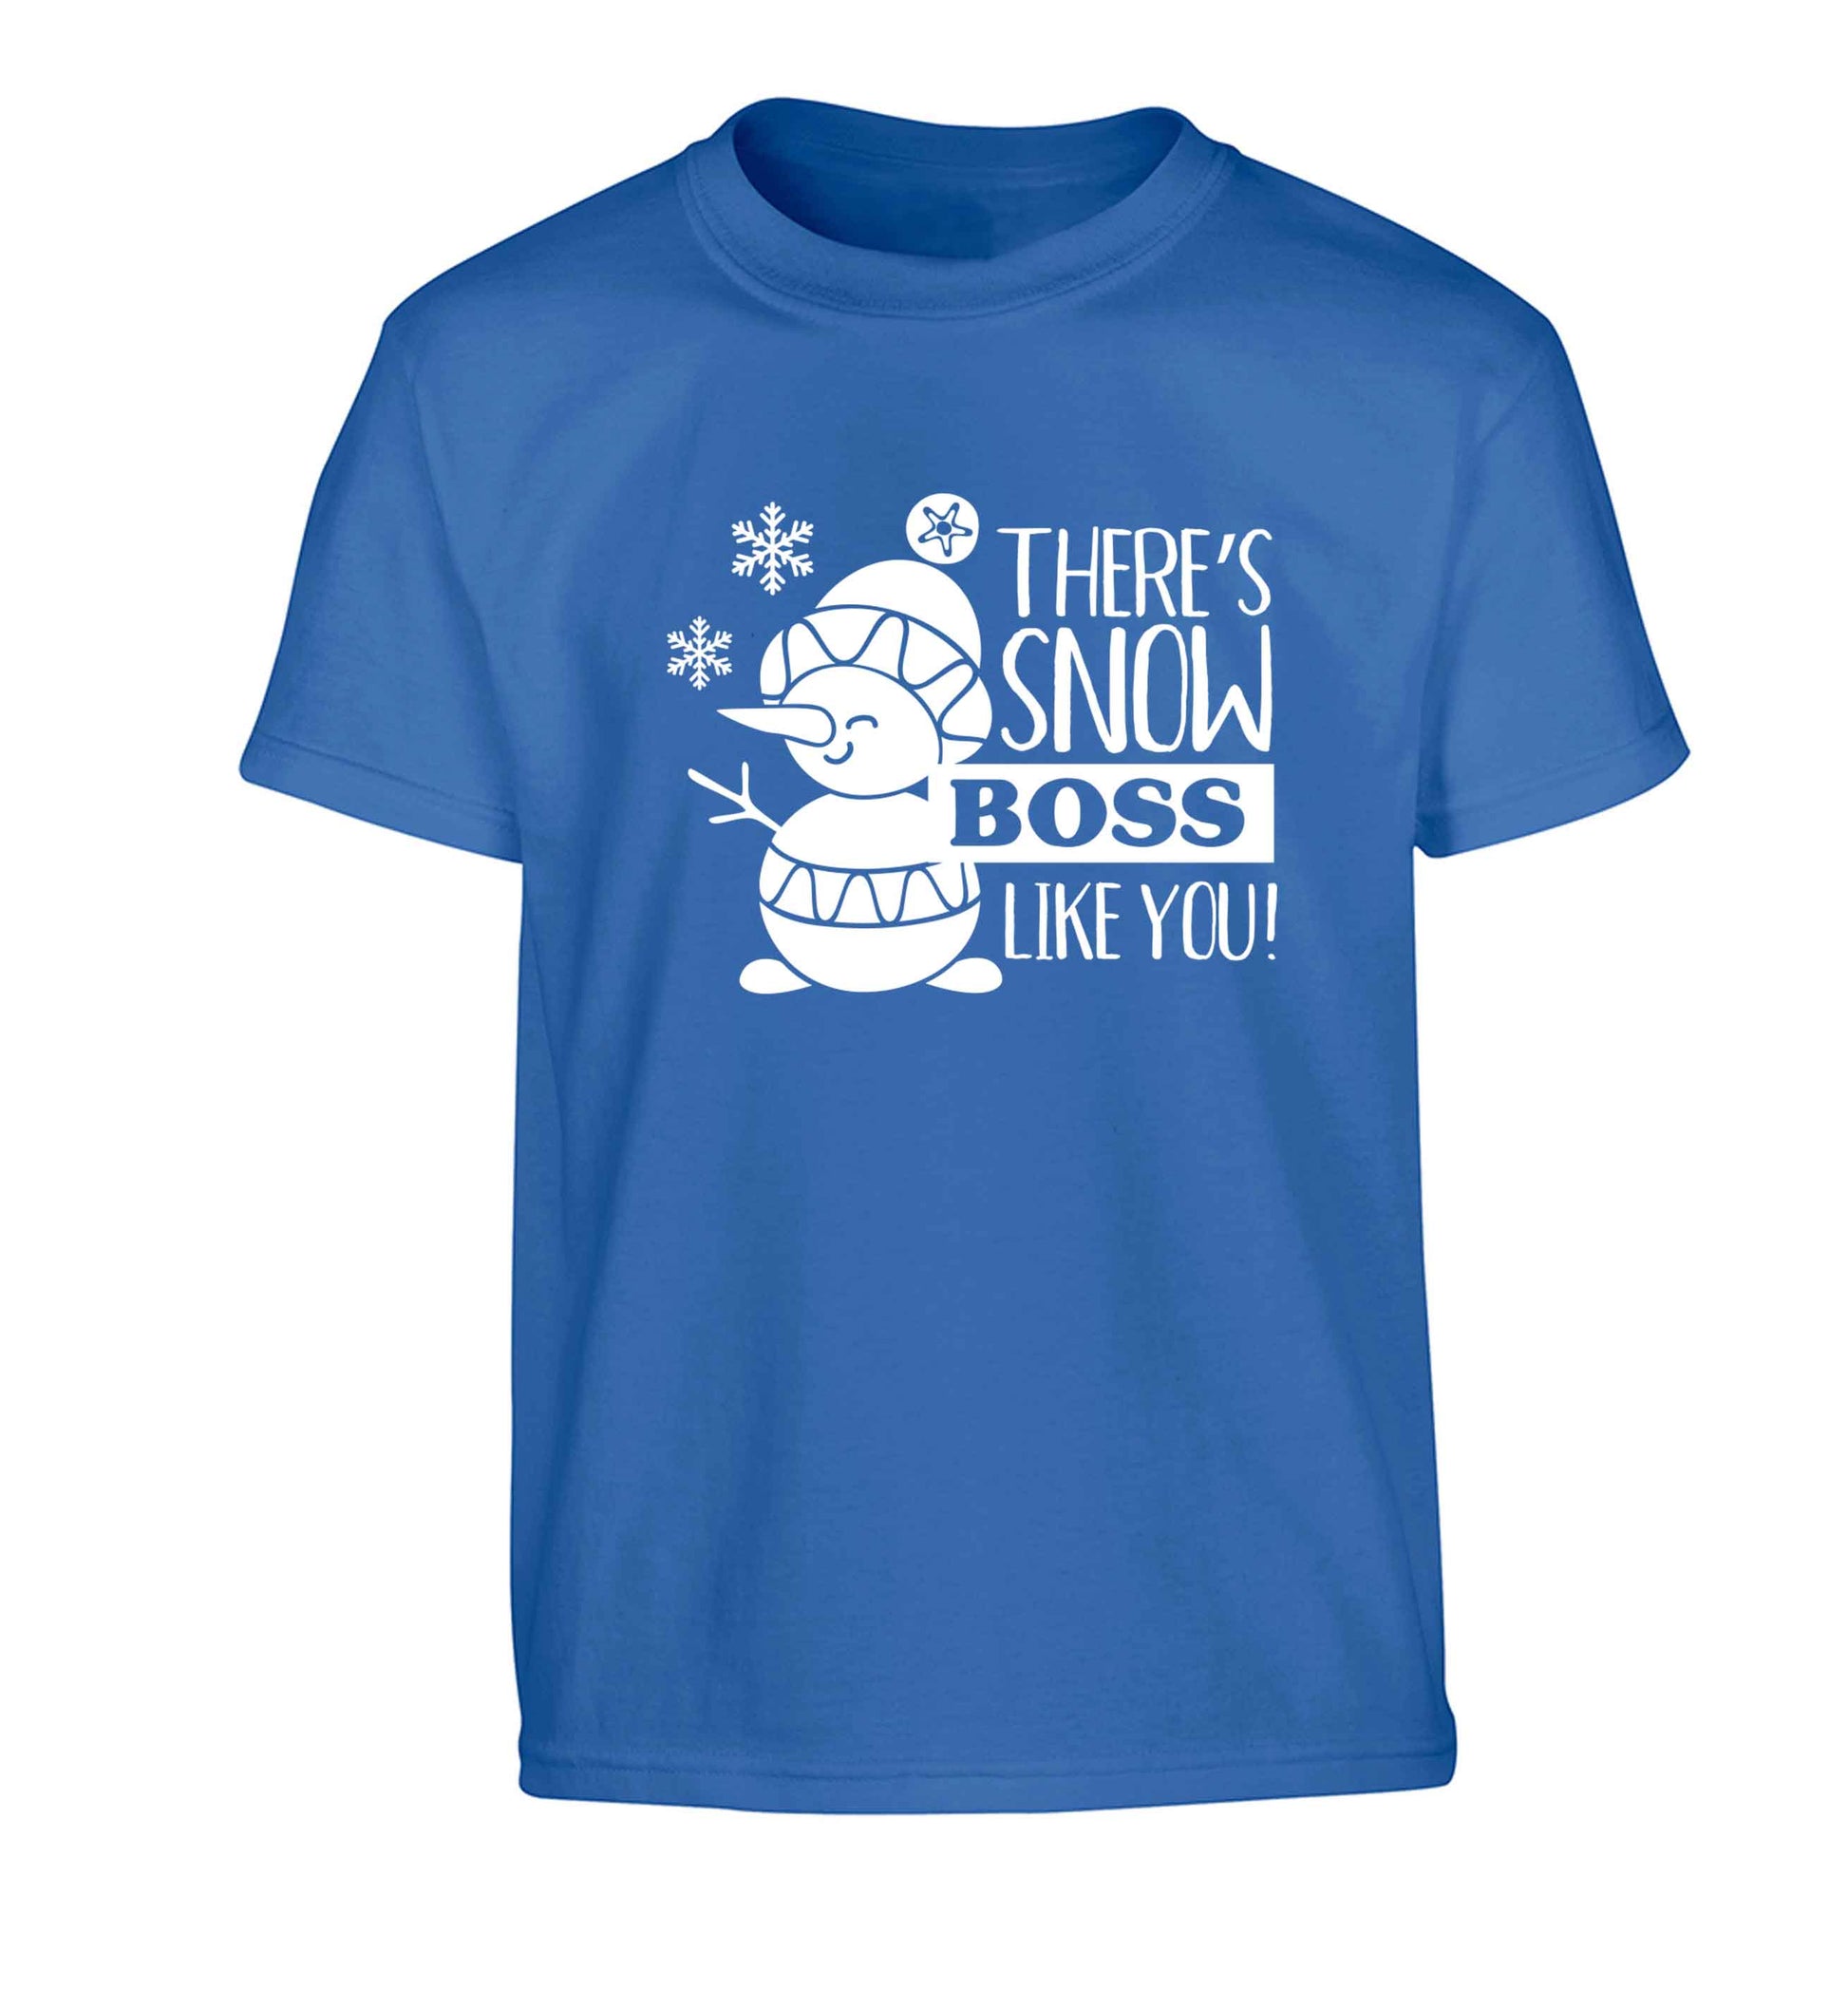 There's snow boss like you Children's blue Tshirt 12-13 Years